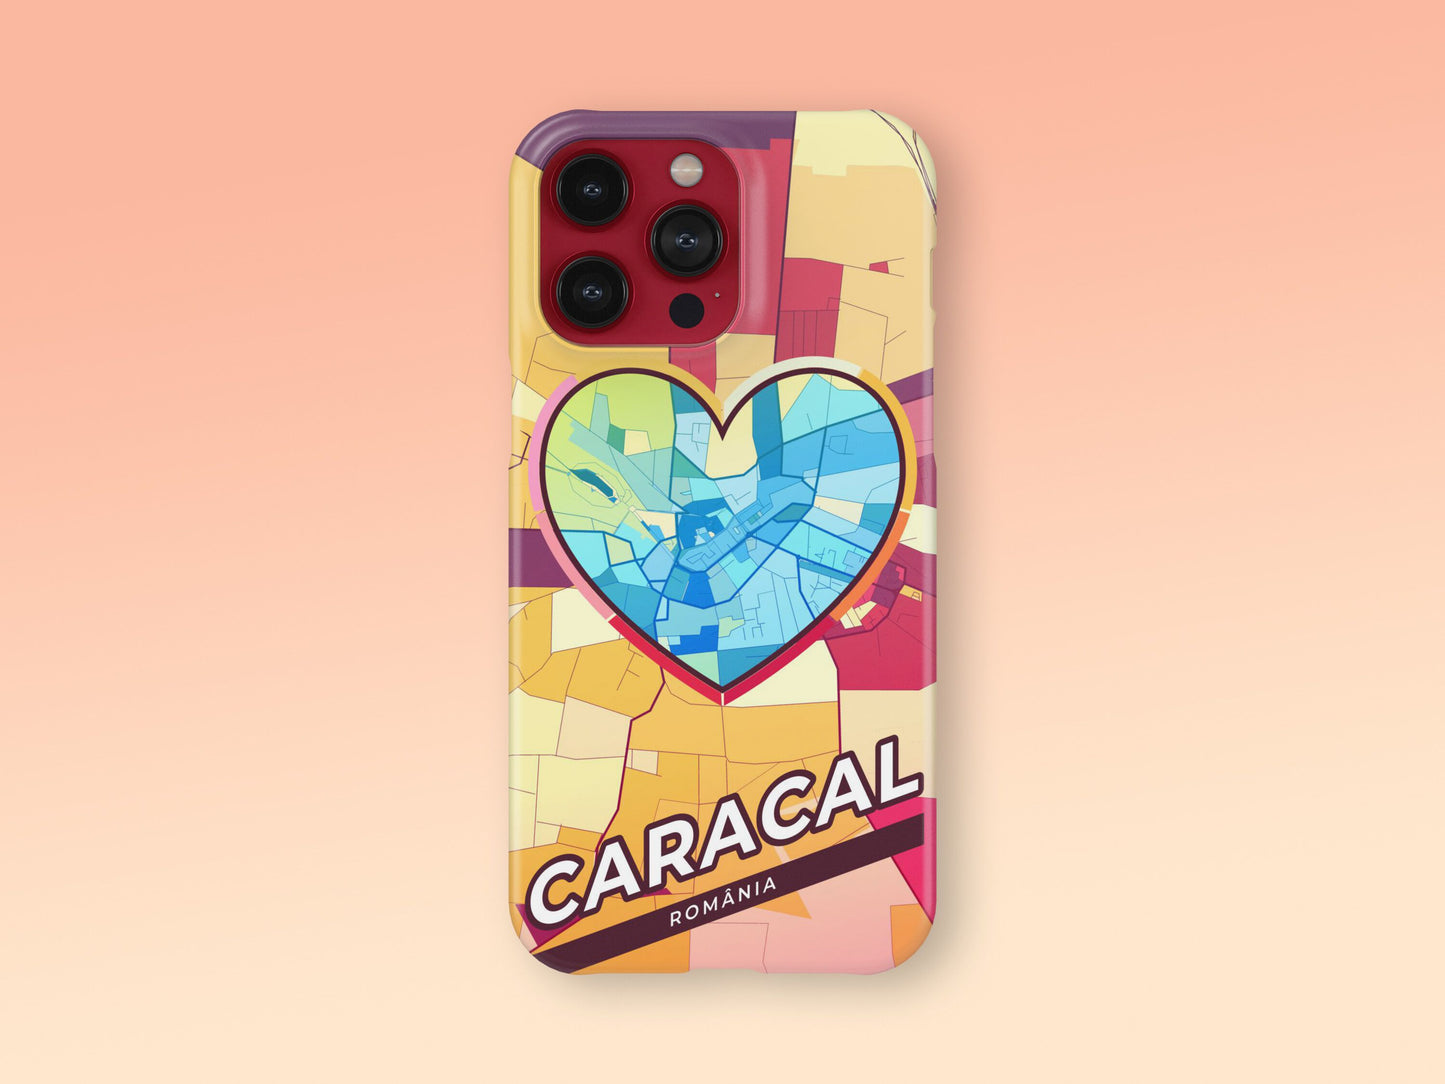 Caracal Romania slim phone case with colorful icon. Birthday, wedding or housewarming gift. Couple match cases. 2